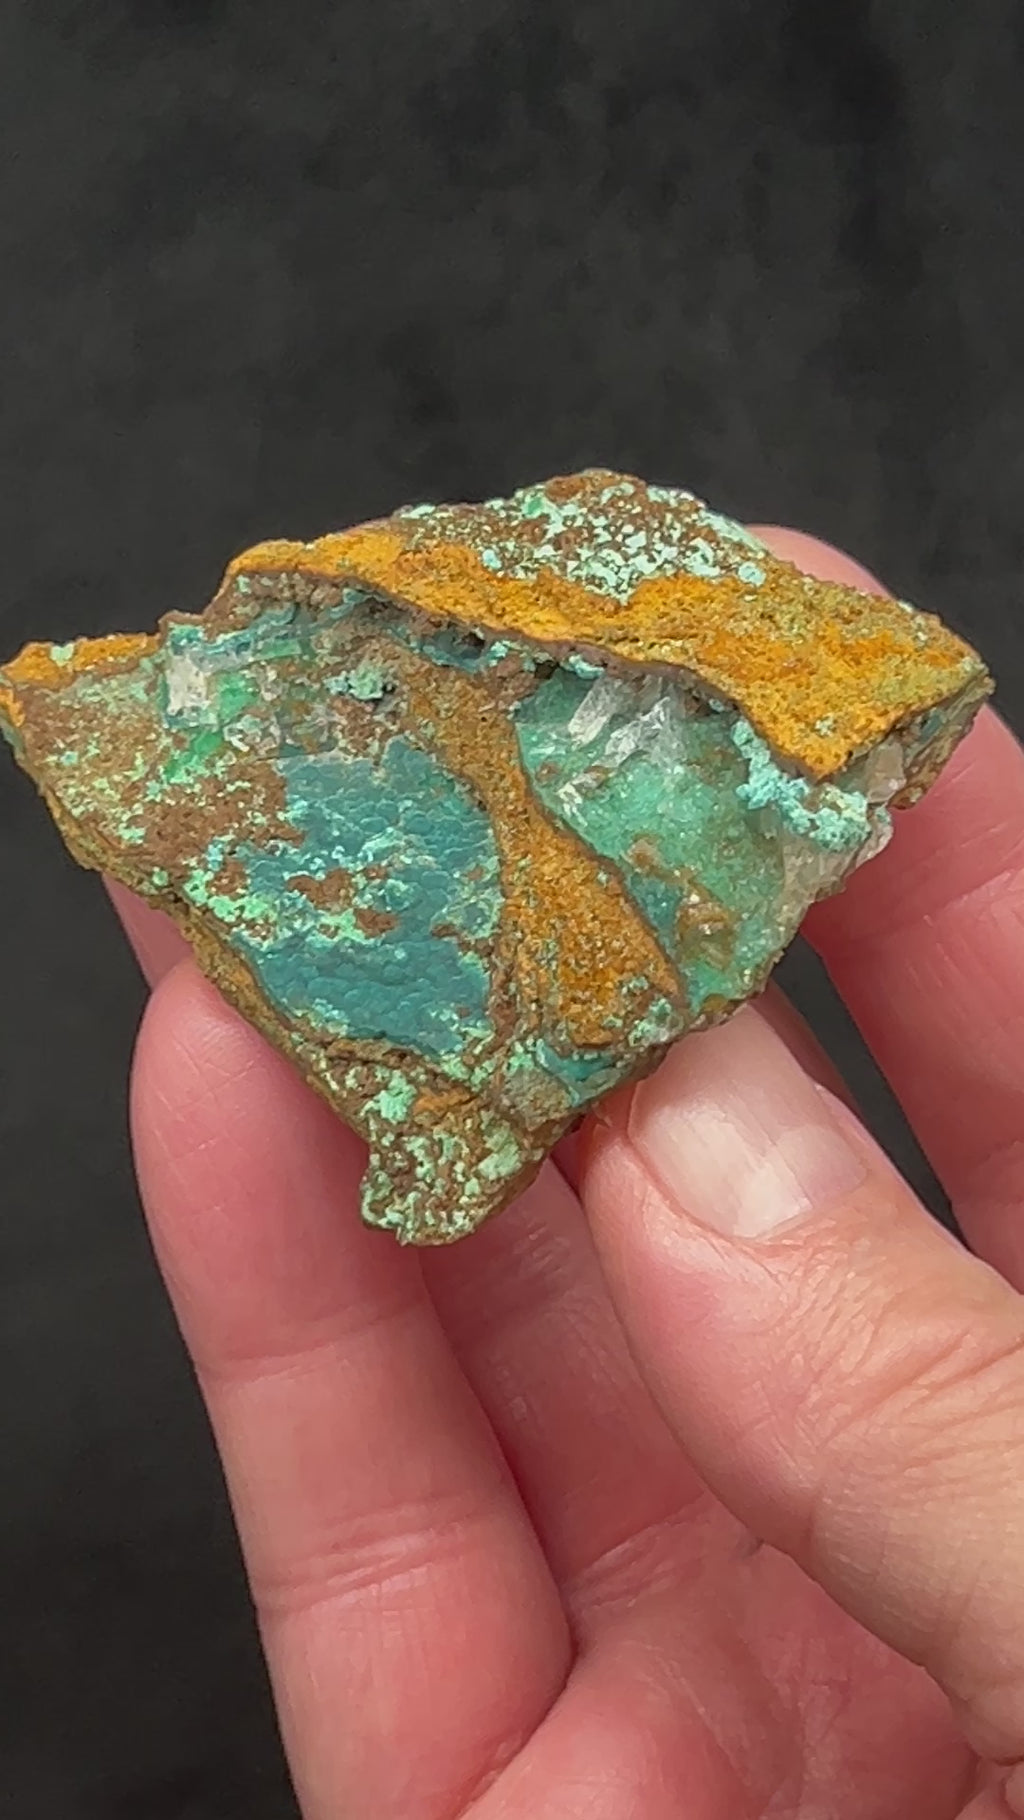 This sensational Rosasite with Calcite specimen is from the Ojuela Mine, Mapimi Municipality, Durango, Mexico. 